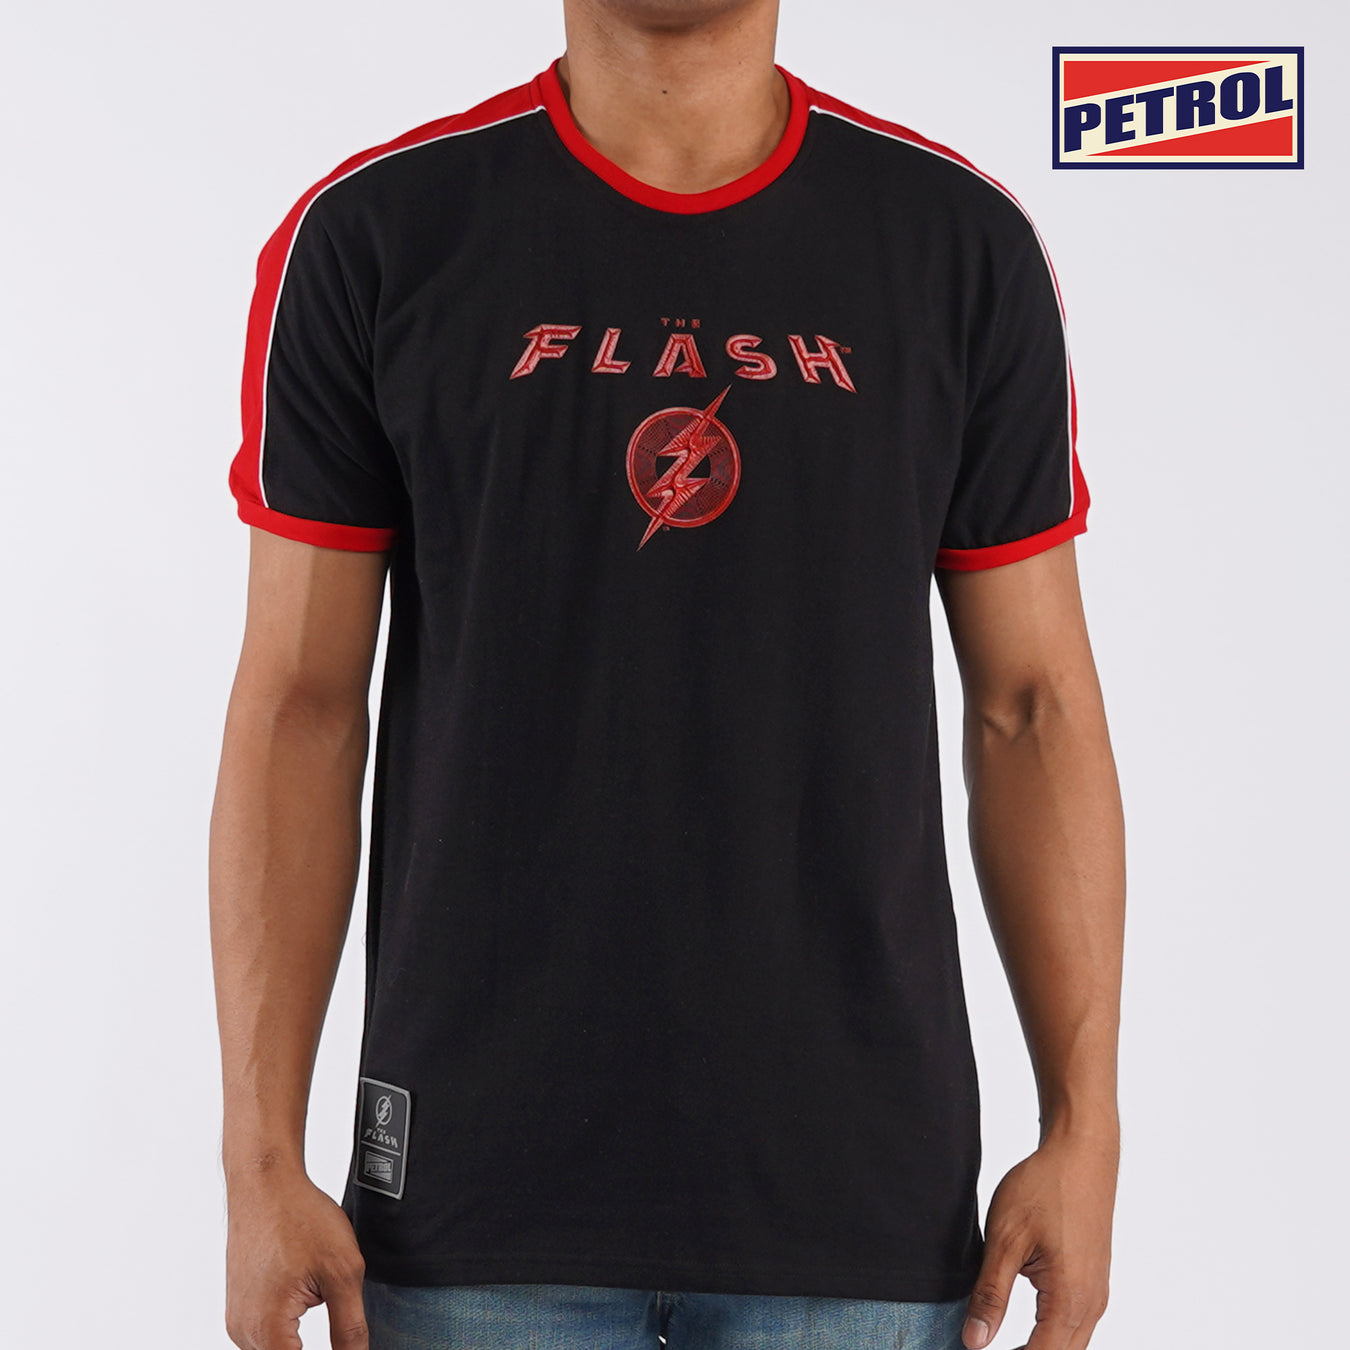 The Flash X Petrol Collection